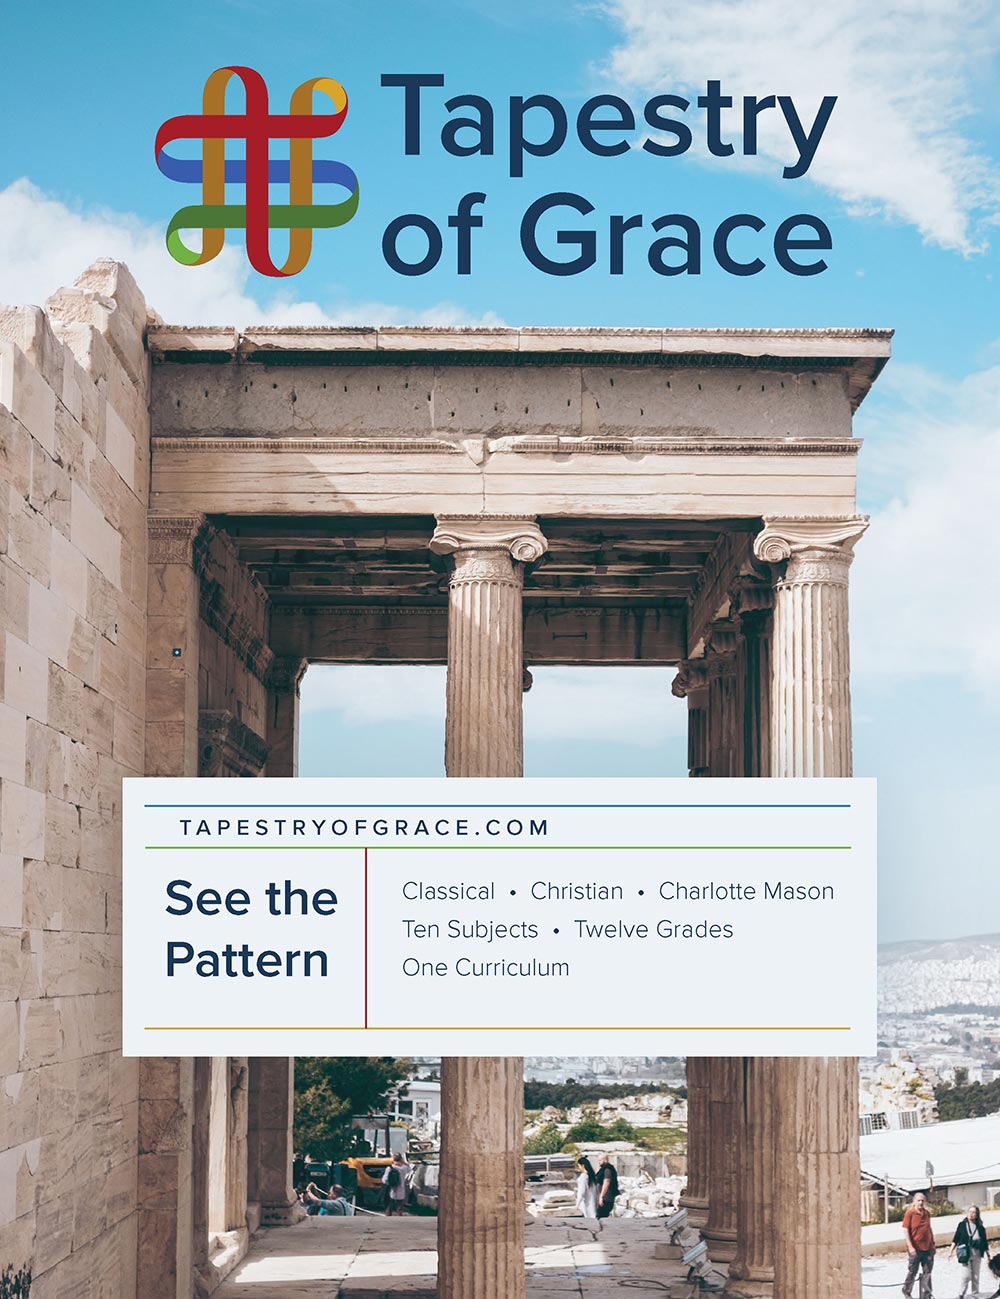 Tapestry of Grace Advertisement